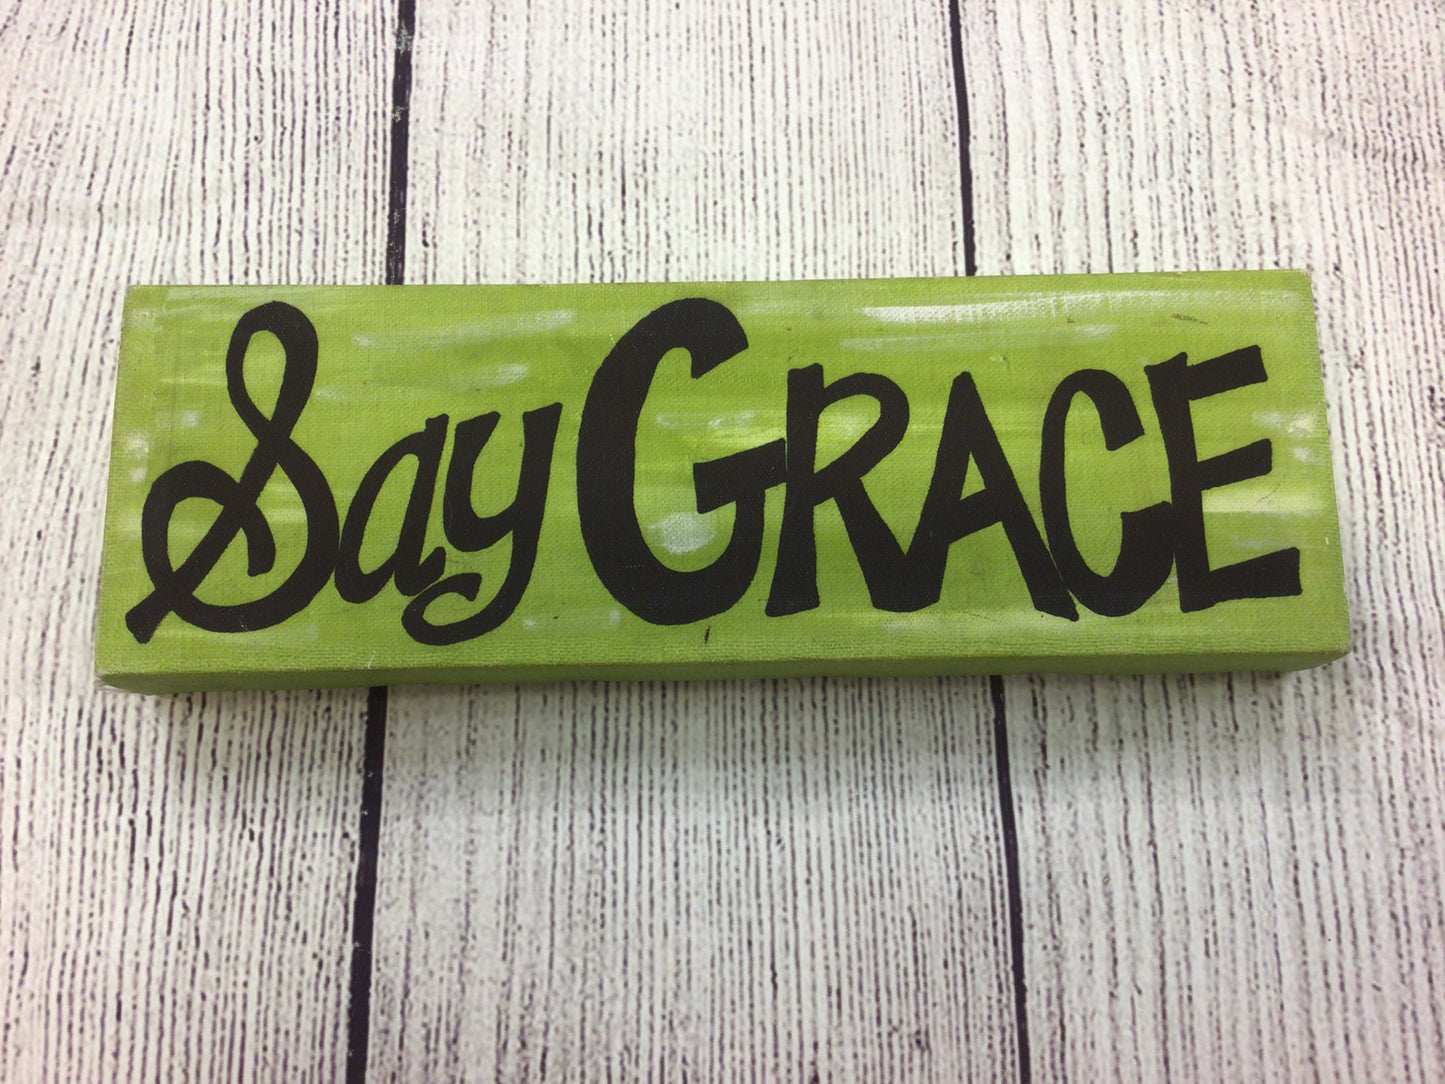 Say Grace Sign